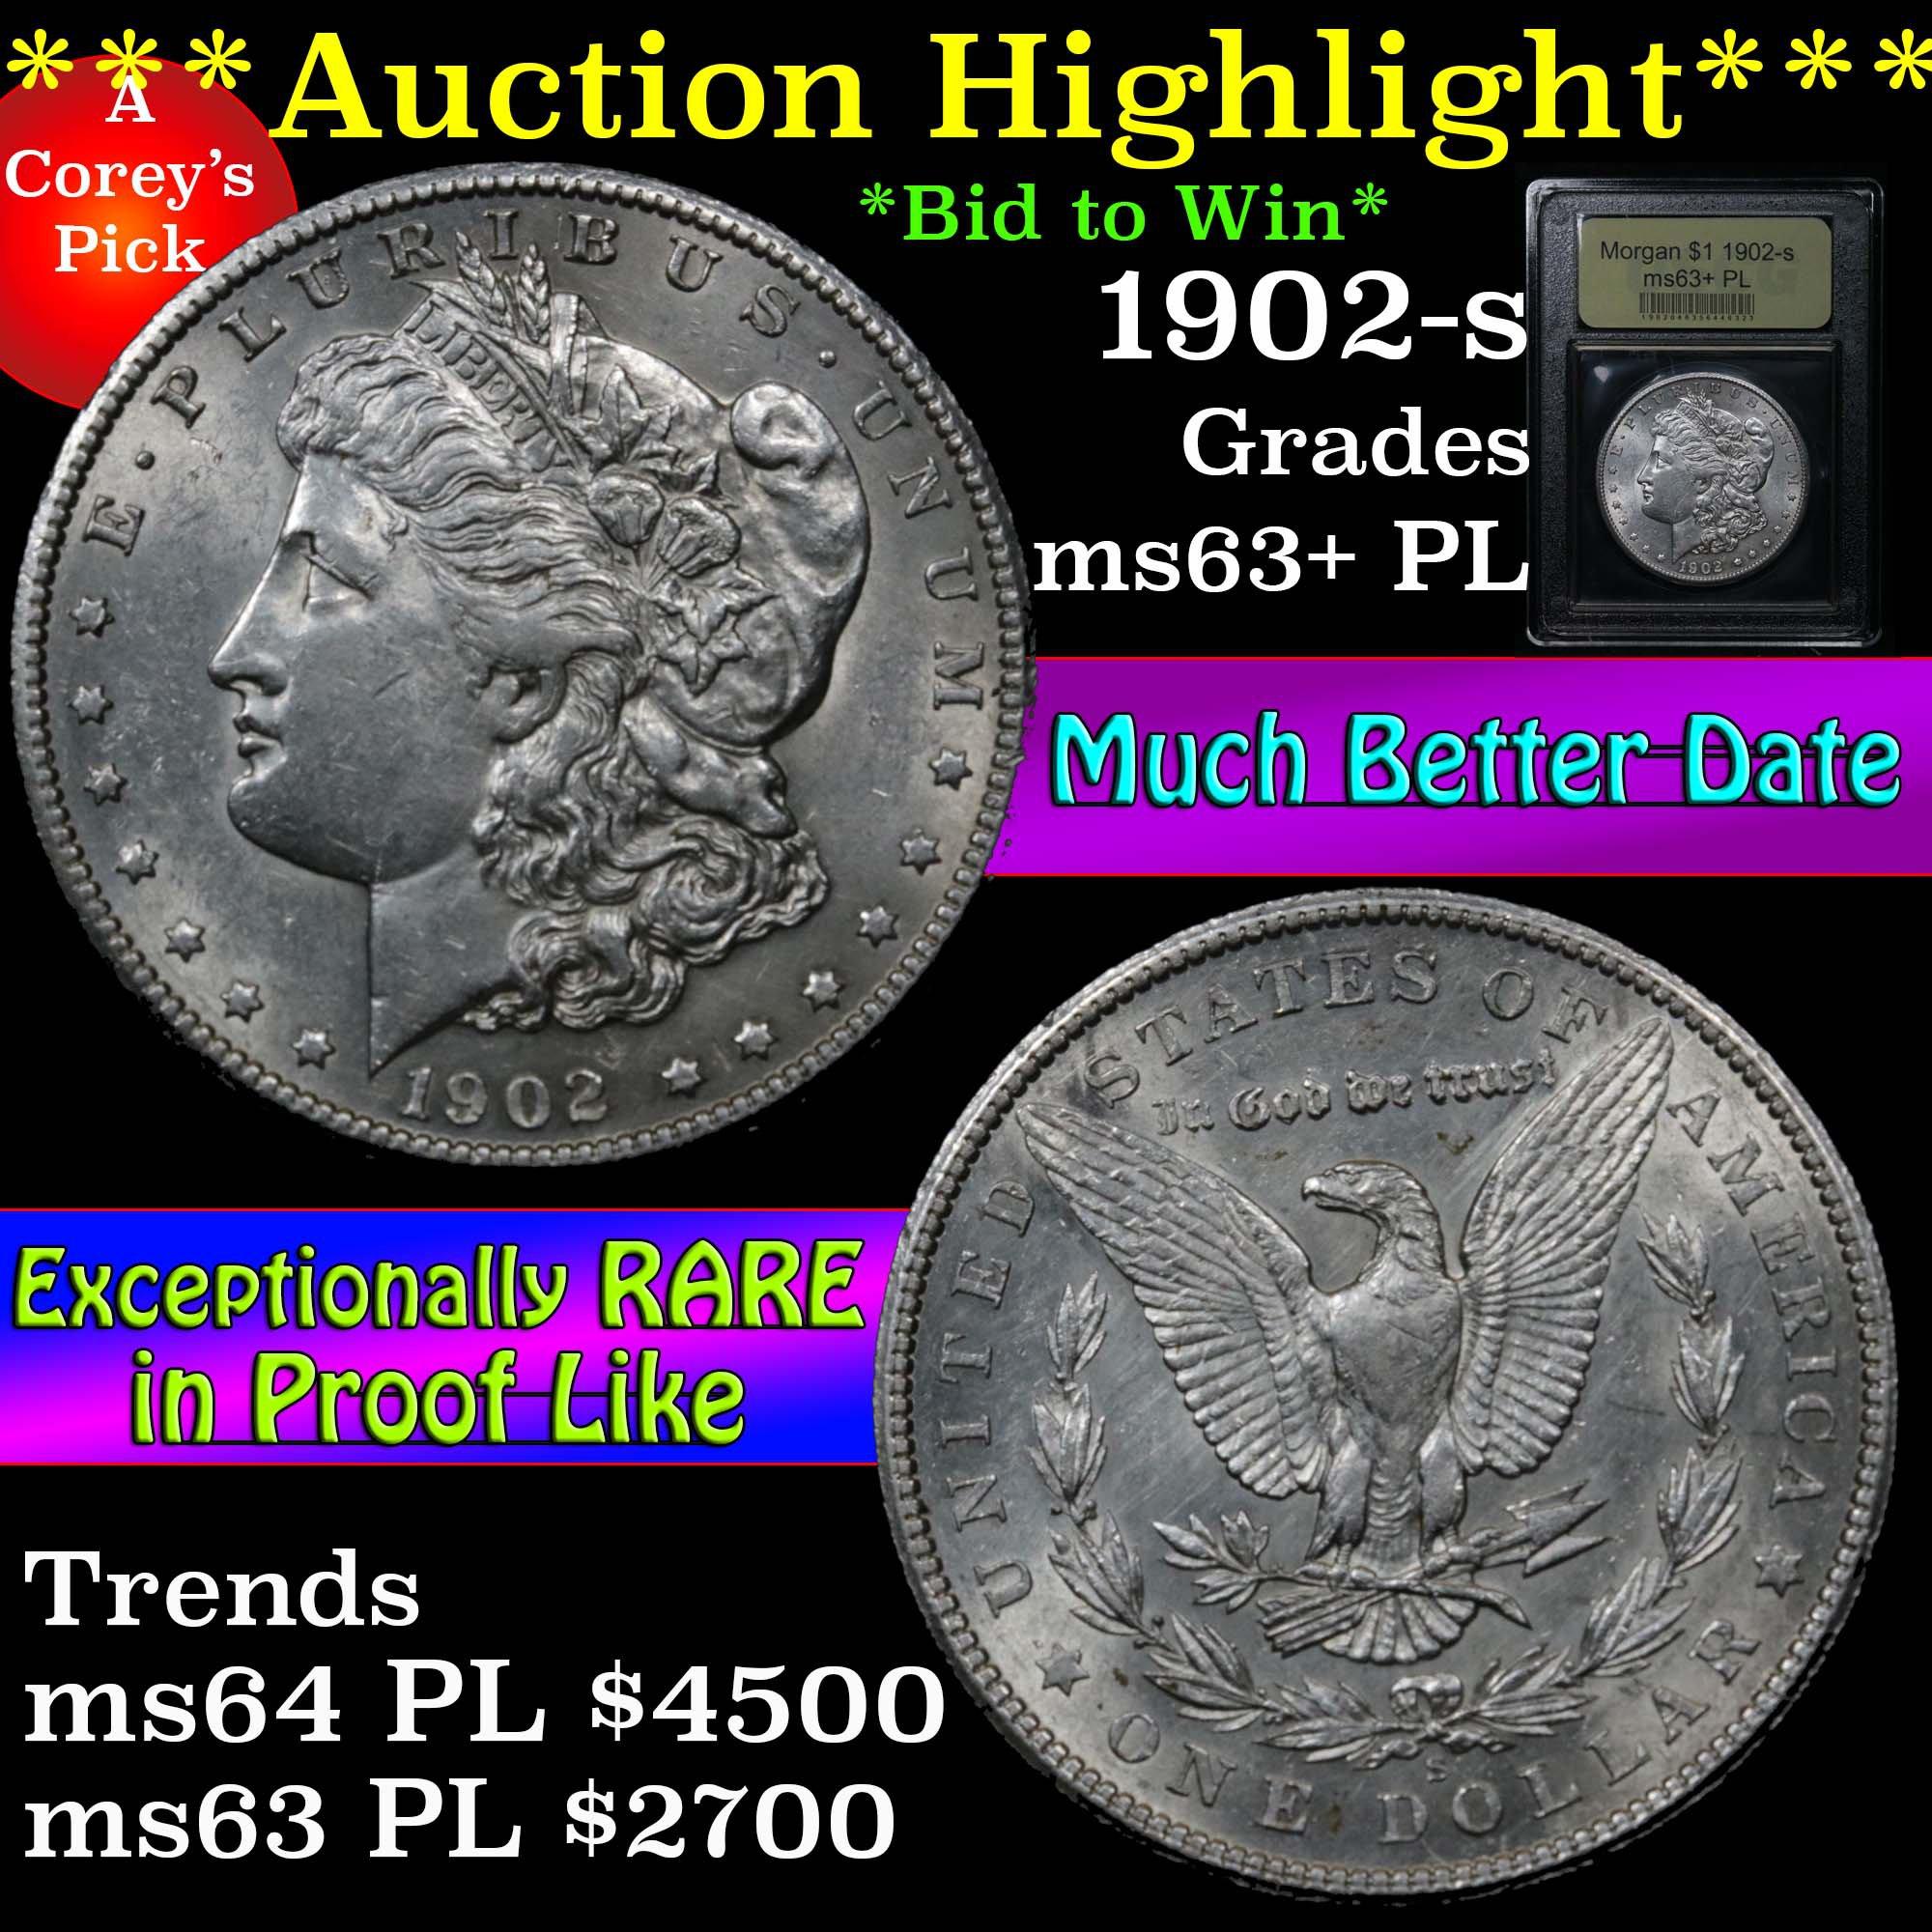 ***Auction Highlight*** 1902-s Morgan Dollar $1 Graded Select Unc+ PL by USCG (fc)